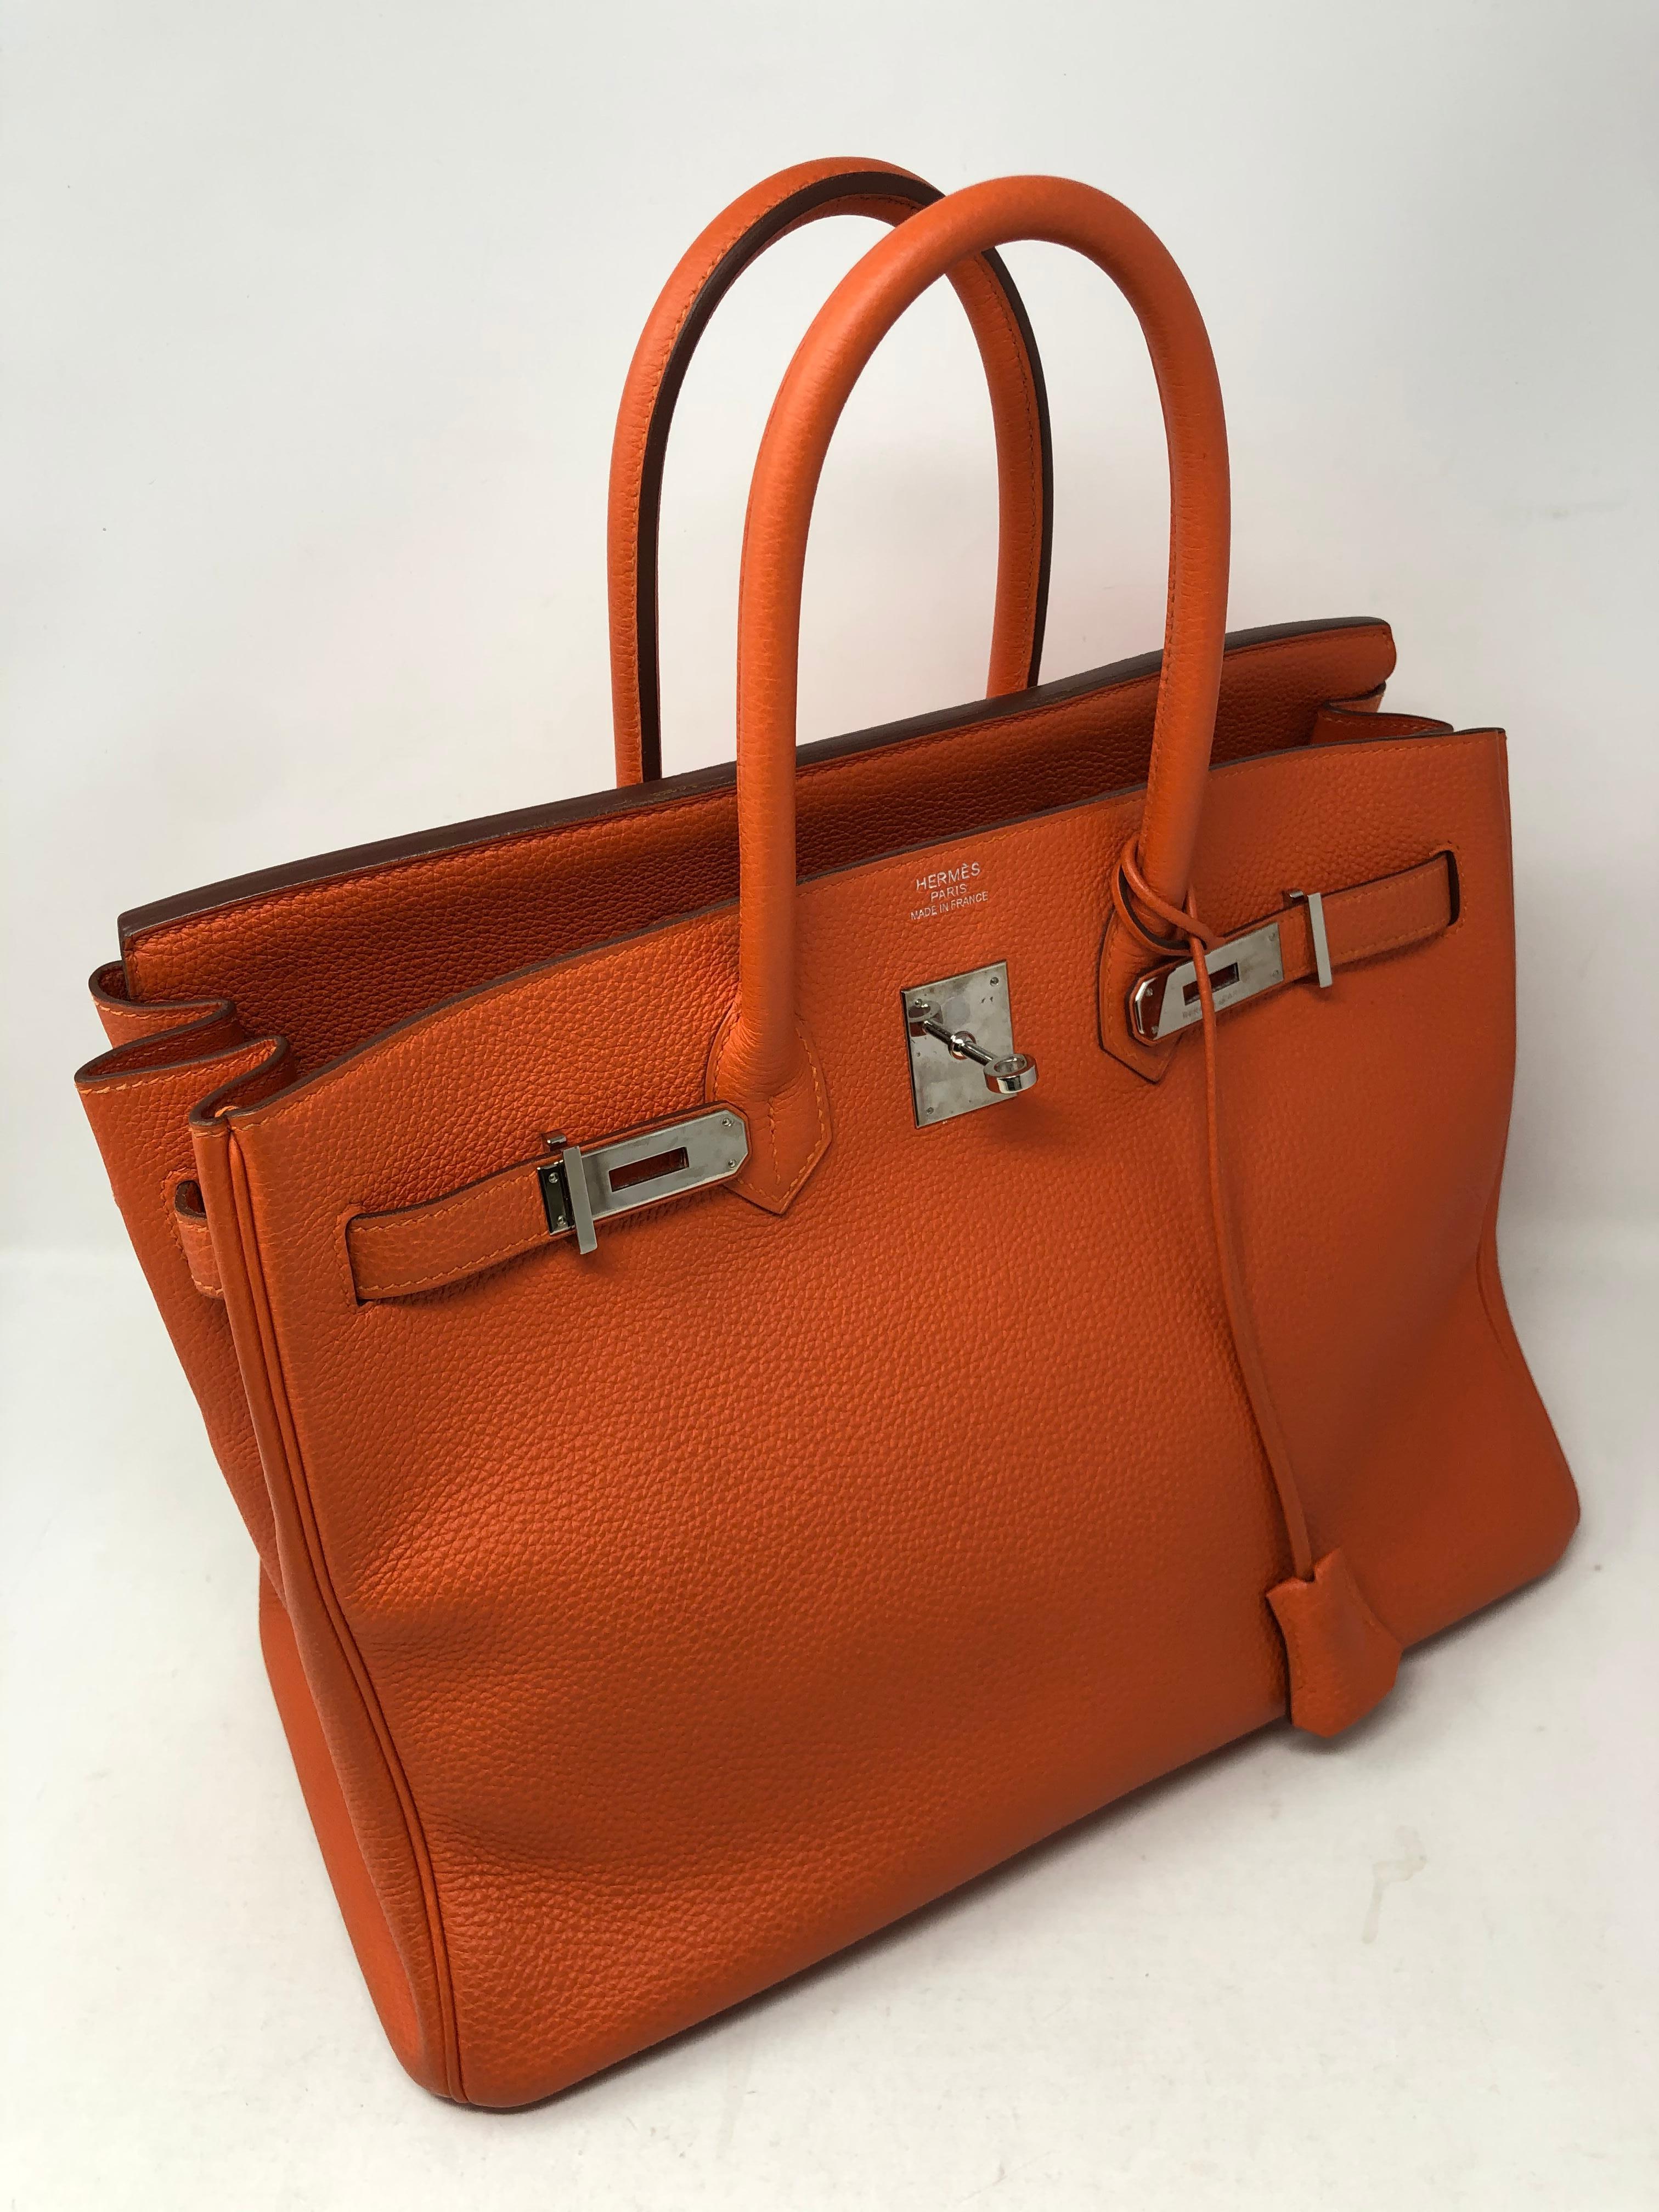 Hermes Orange Birkin 35 Togo leather. Palladium hardware. Excellent condition. The Hermes Orange color. Most wanted combination. Includes the original receipt from 2015. Hermes dust cover, clochette, lock and keys included. Beautiful orange togo